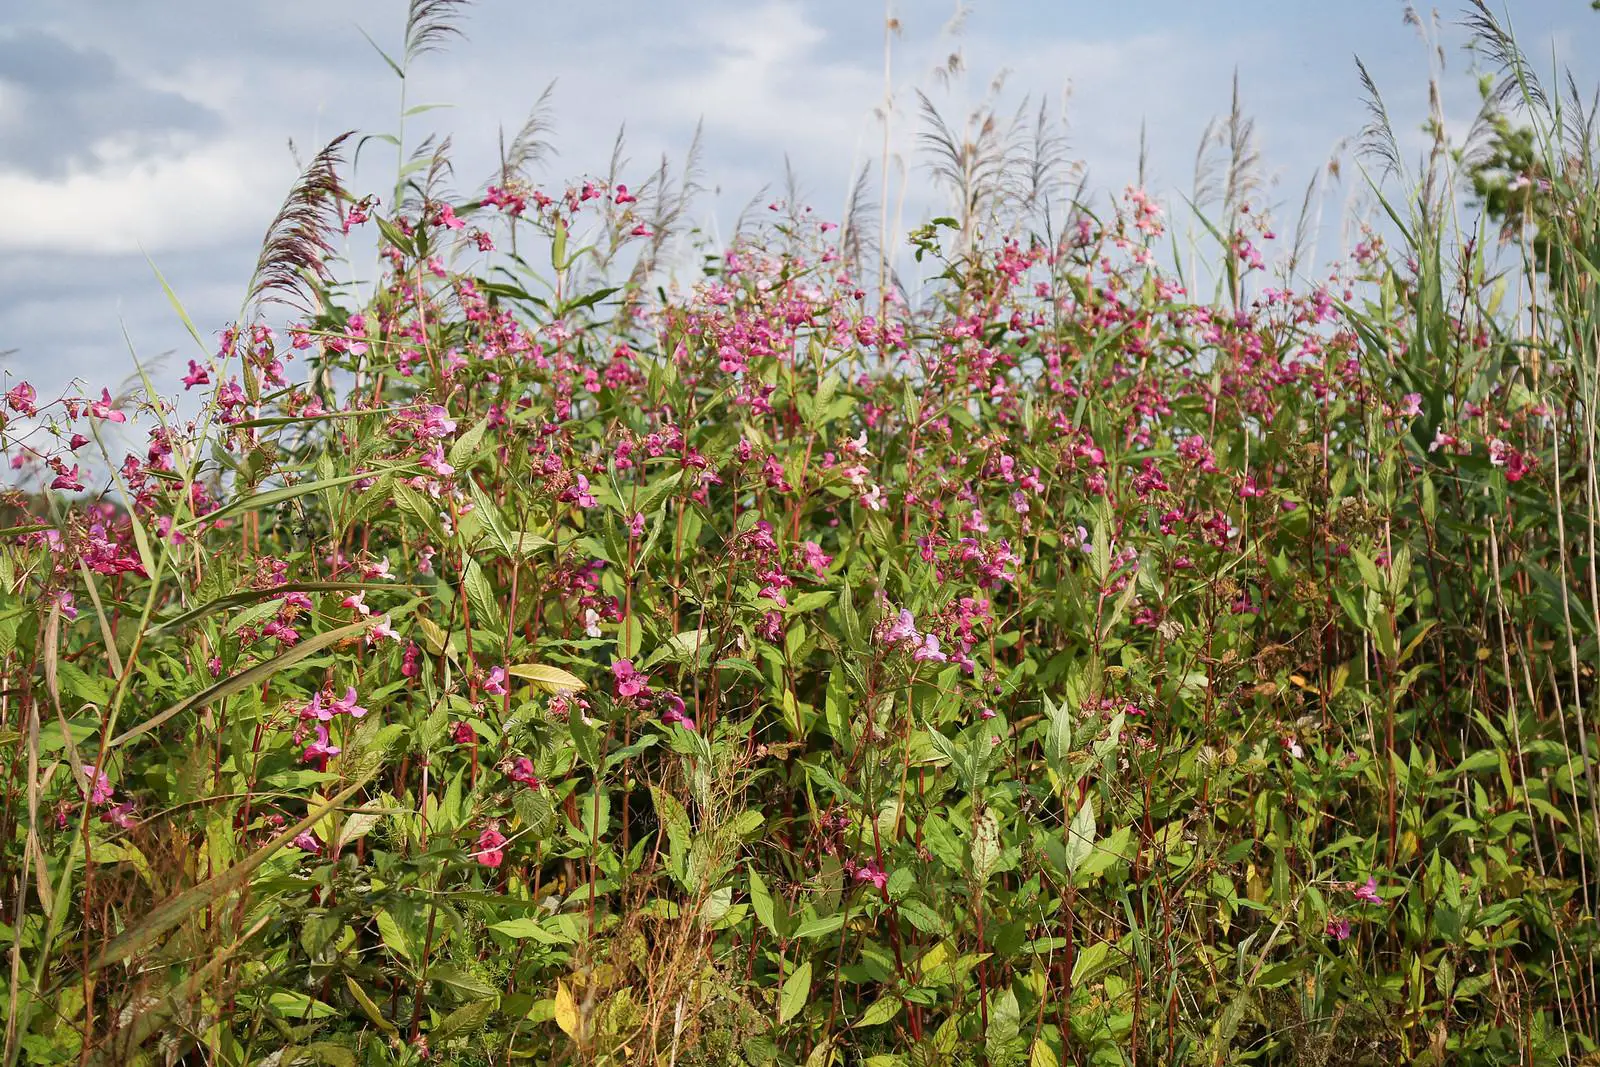 Himalayan Balsam grows rapidly in an area and consumes the local terrain